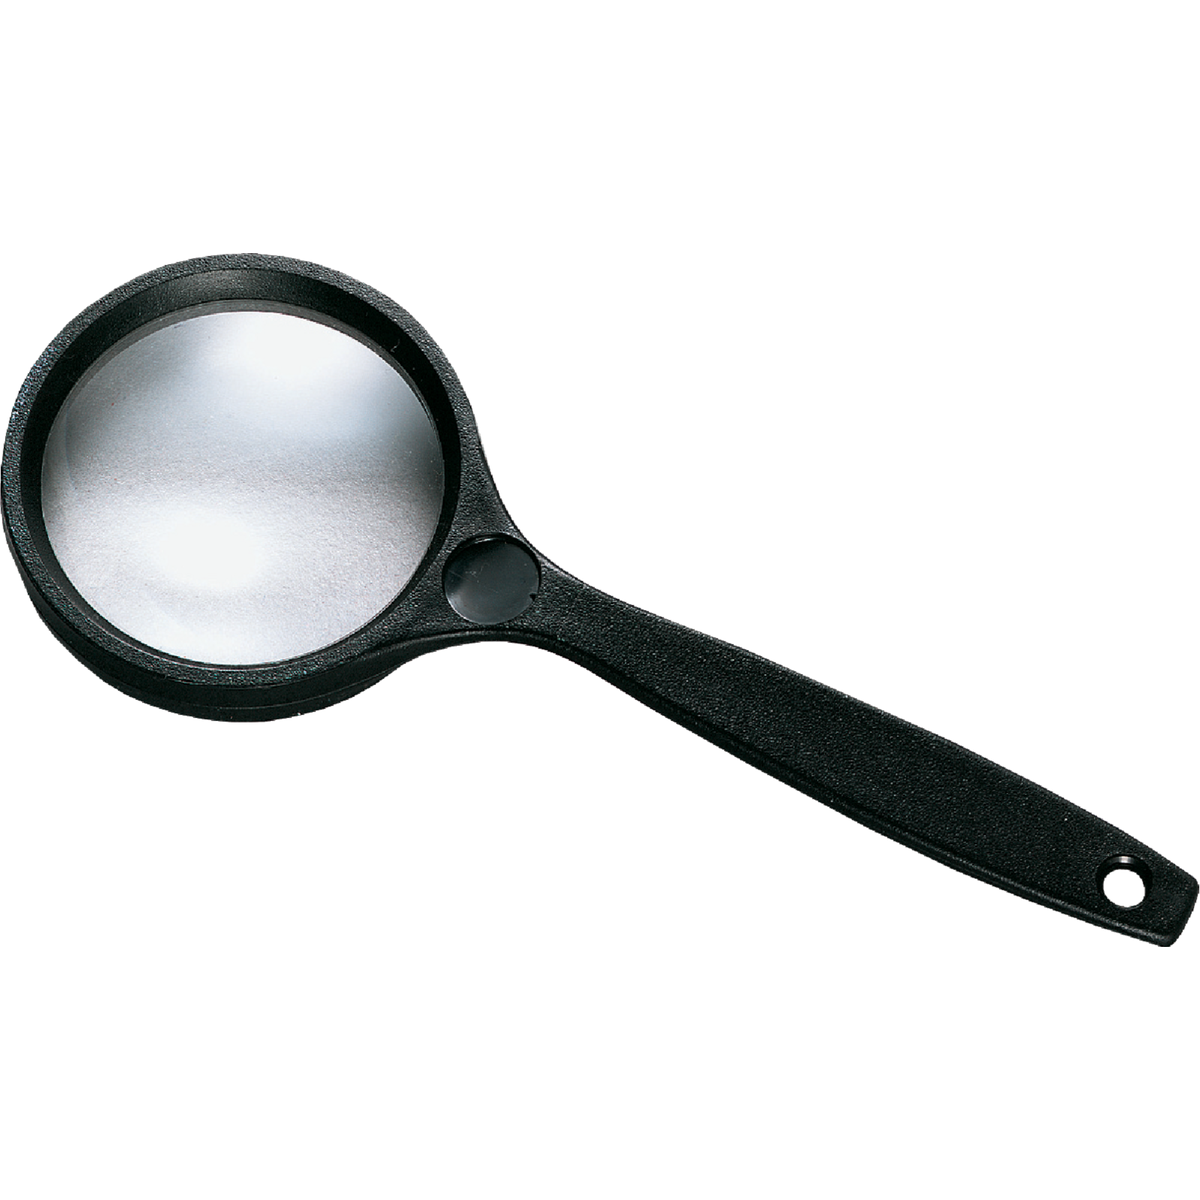 Mirrors & Magnifiers